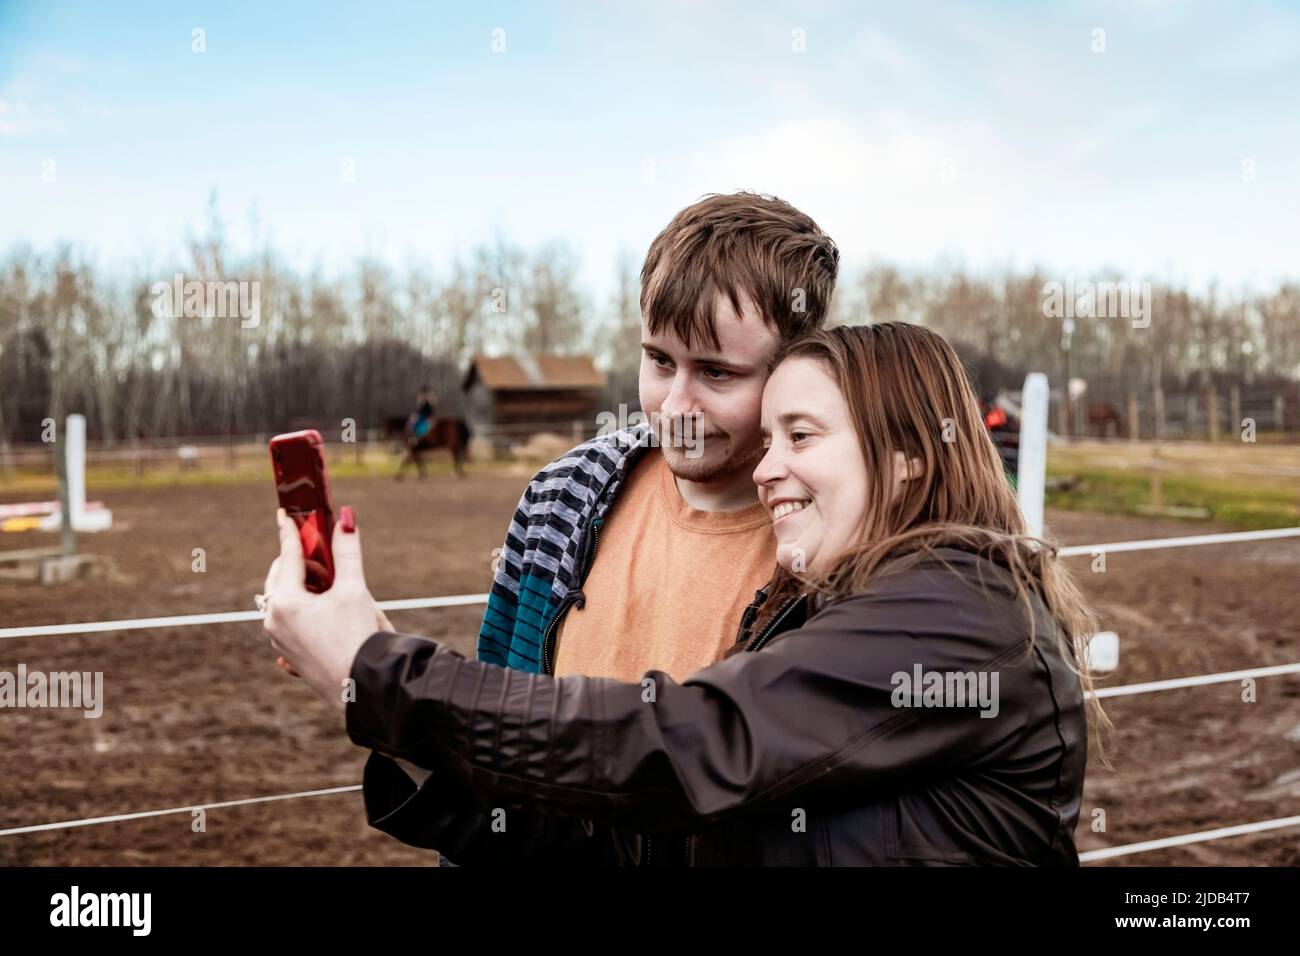 A mom with epilepsy taking a self-portrait with her son who has Aspberger Syndrome at an equine centre; Westlock, Alberta, Canada Stock Photo